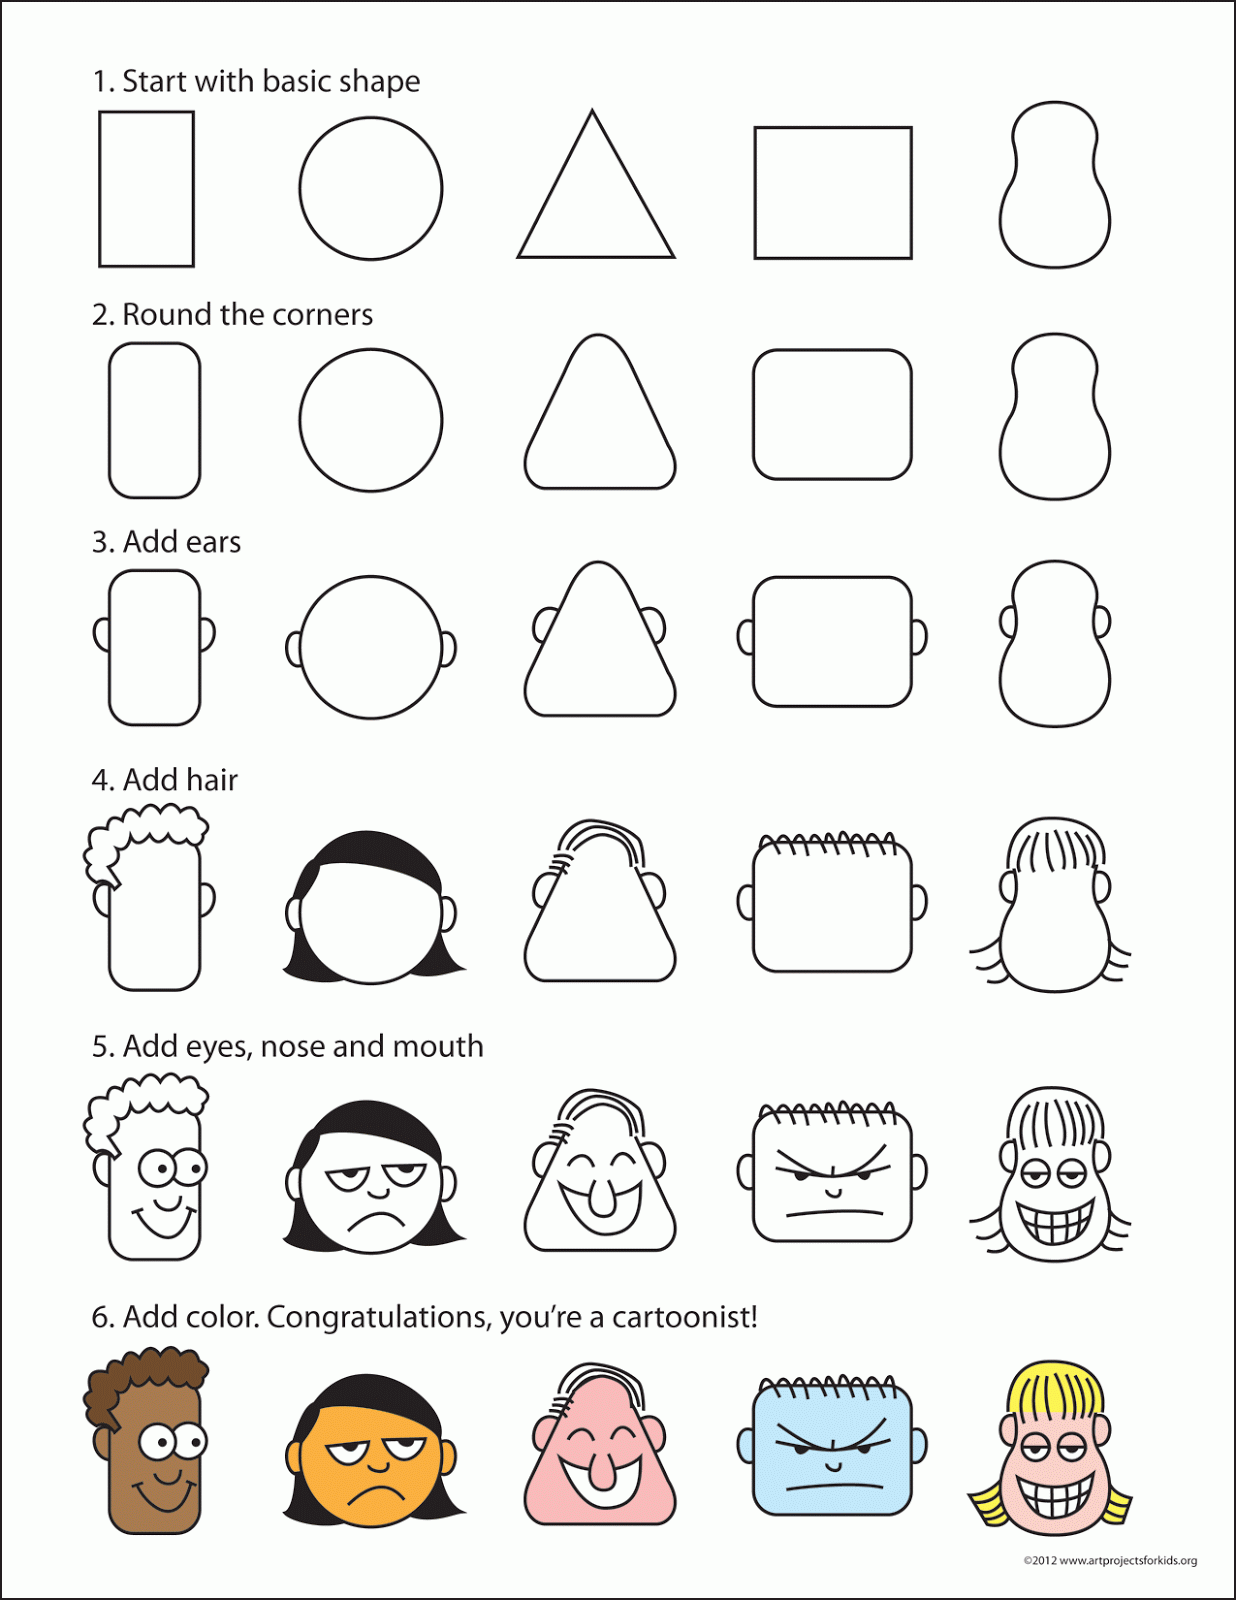 How to Draw Cartoon Faces | Art Projects for Kids